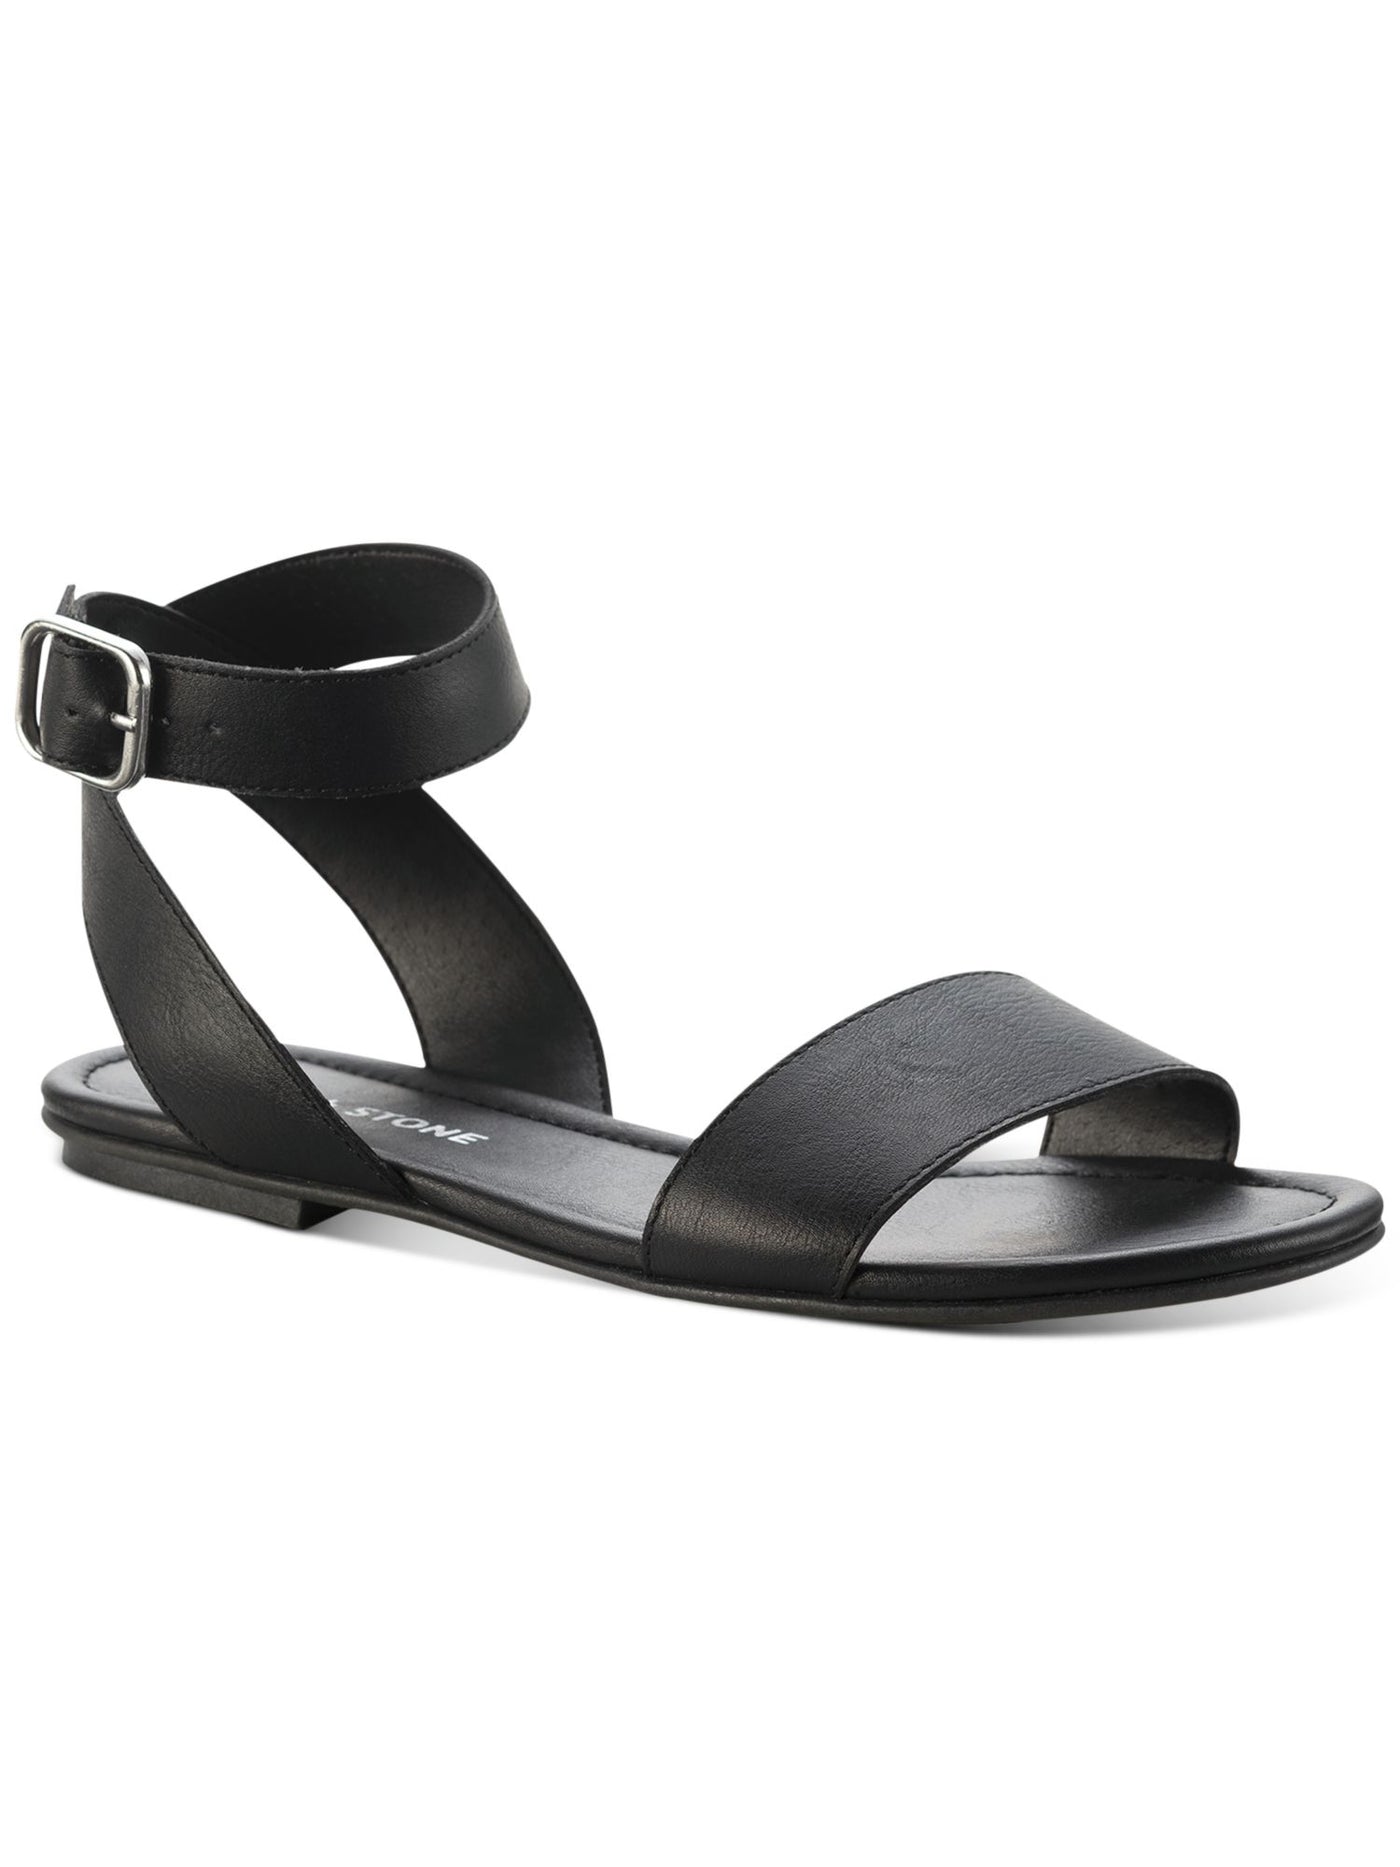 SUN STONE Womens Black Ankle Strap Strappy Miiah Round Toe Buckle Sandals Shoes 9 M